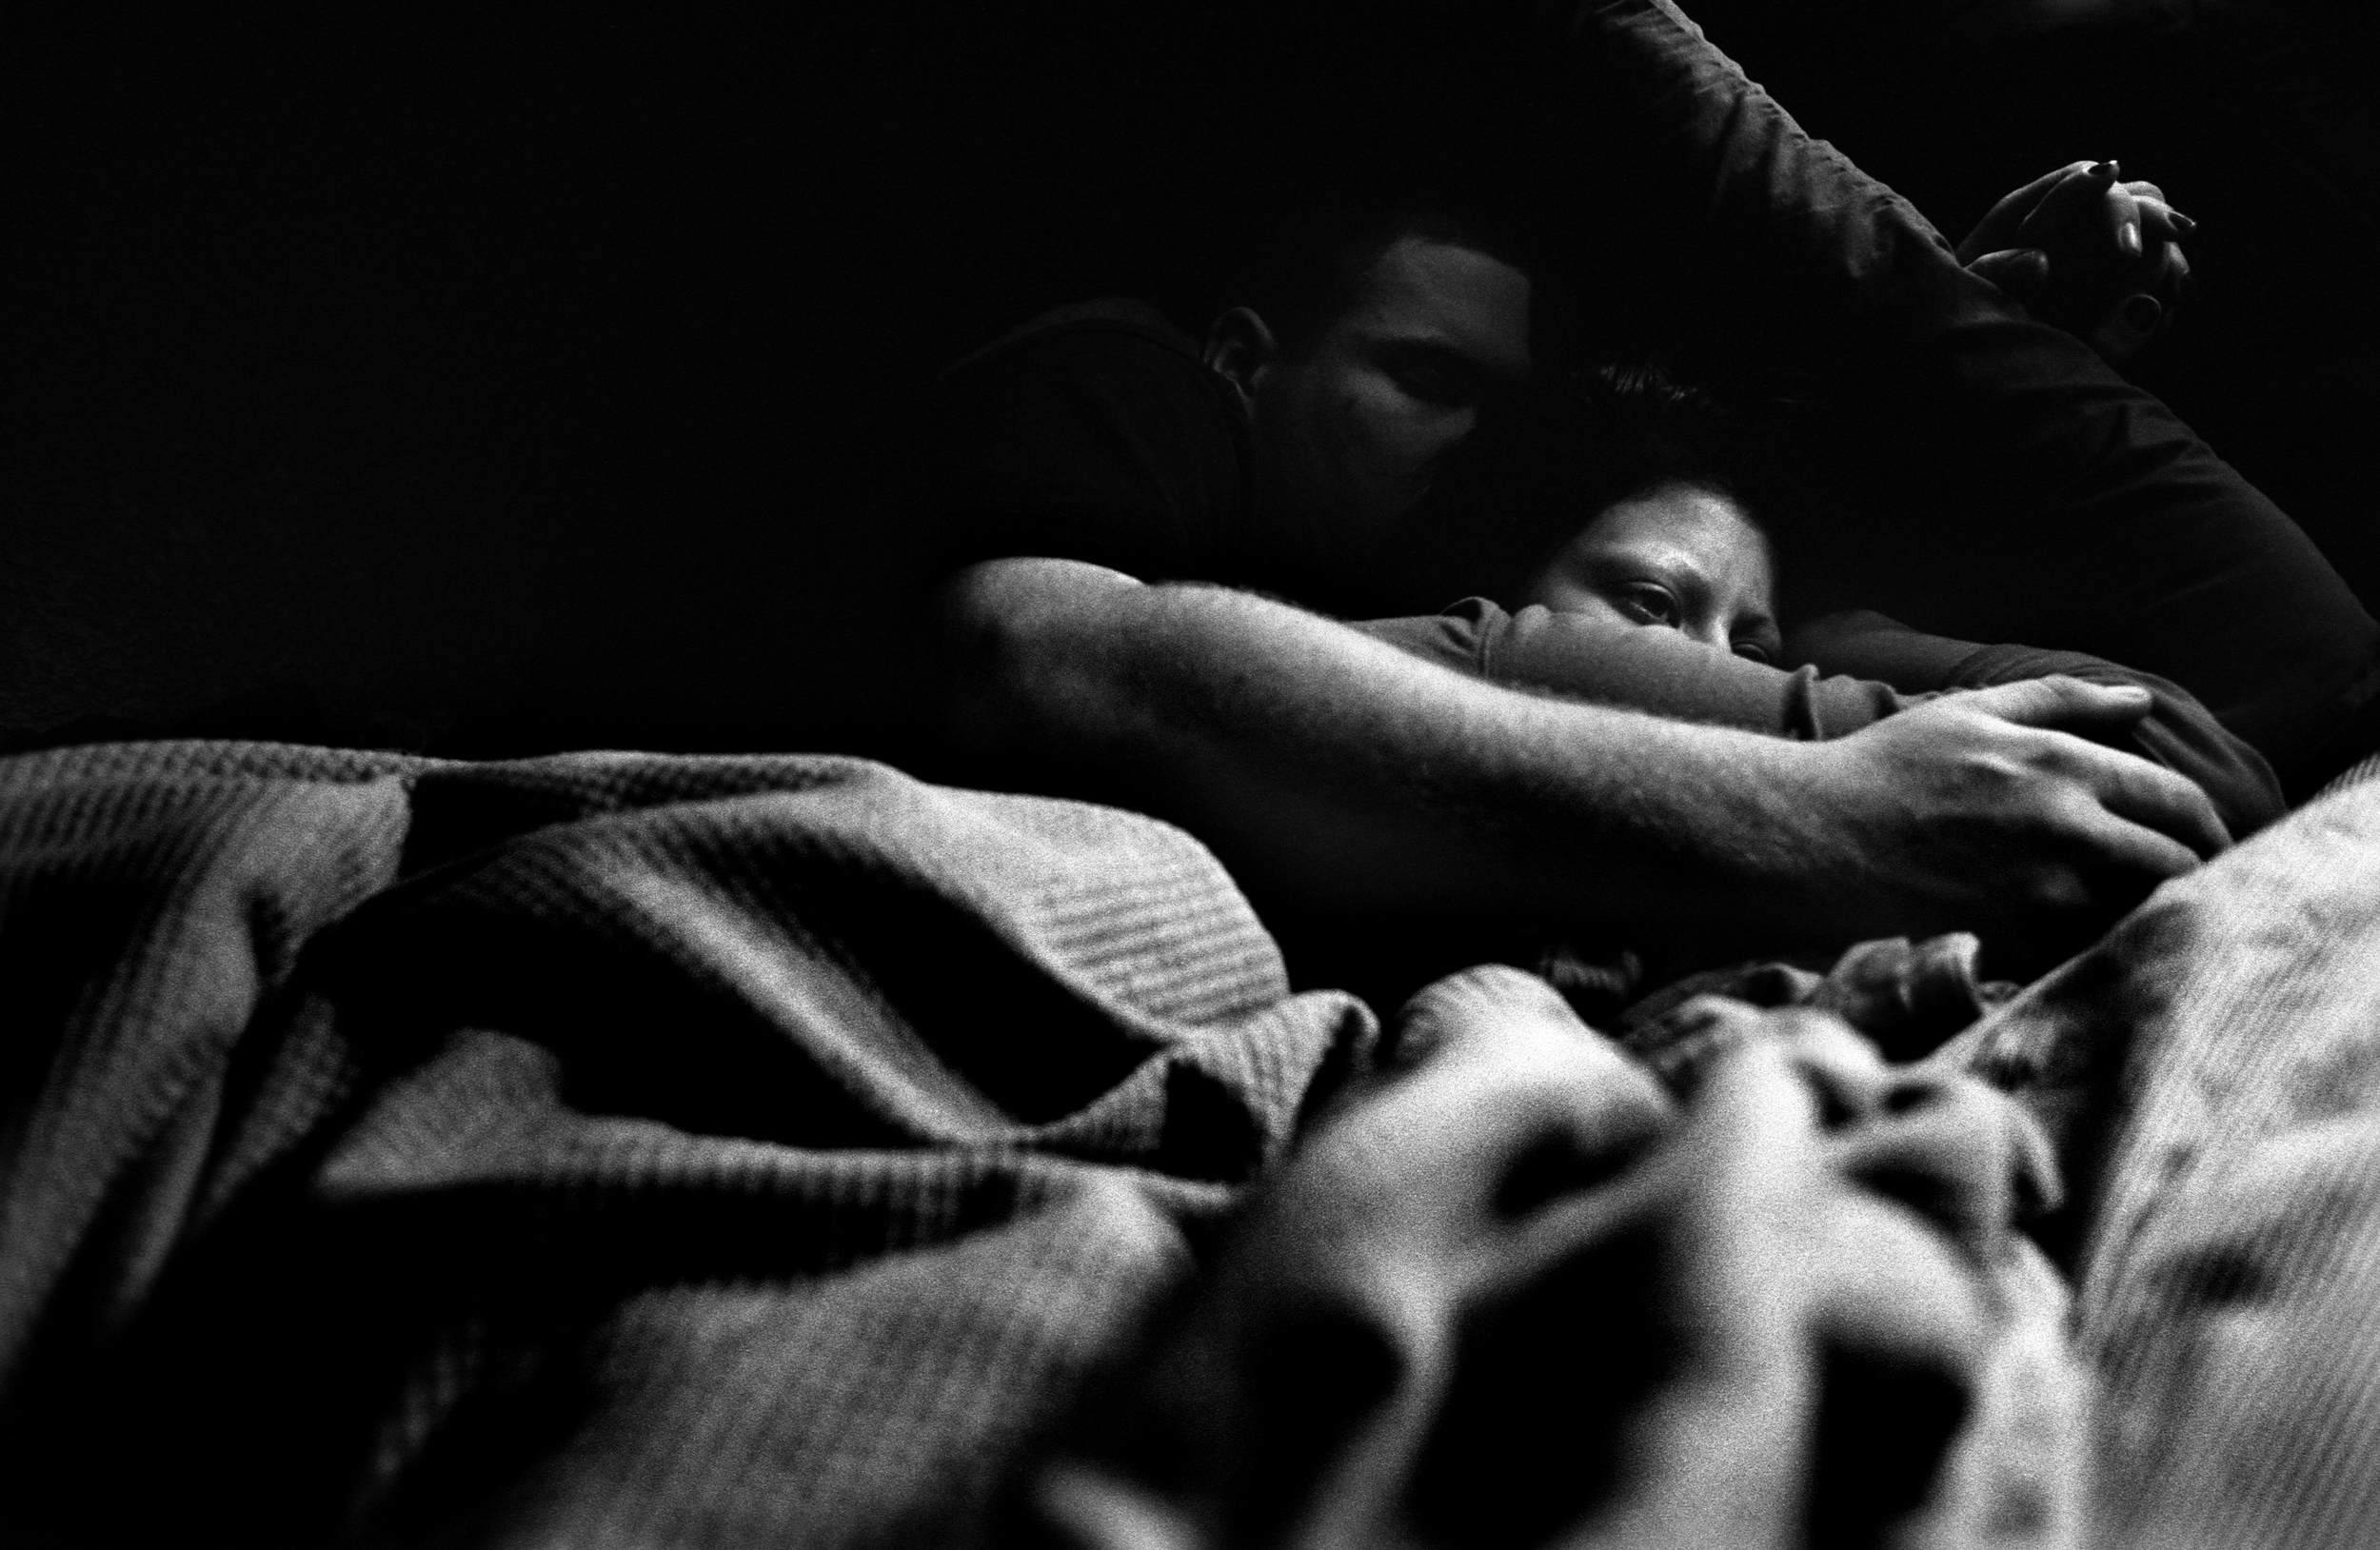  SPC Adam Ramsey lies in bed with friend, Savannah Gordon, after taking opioids at his sister's house in Carson City, Nevada,&nbsp;2010. 